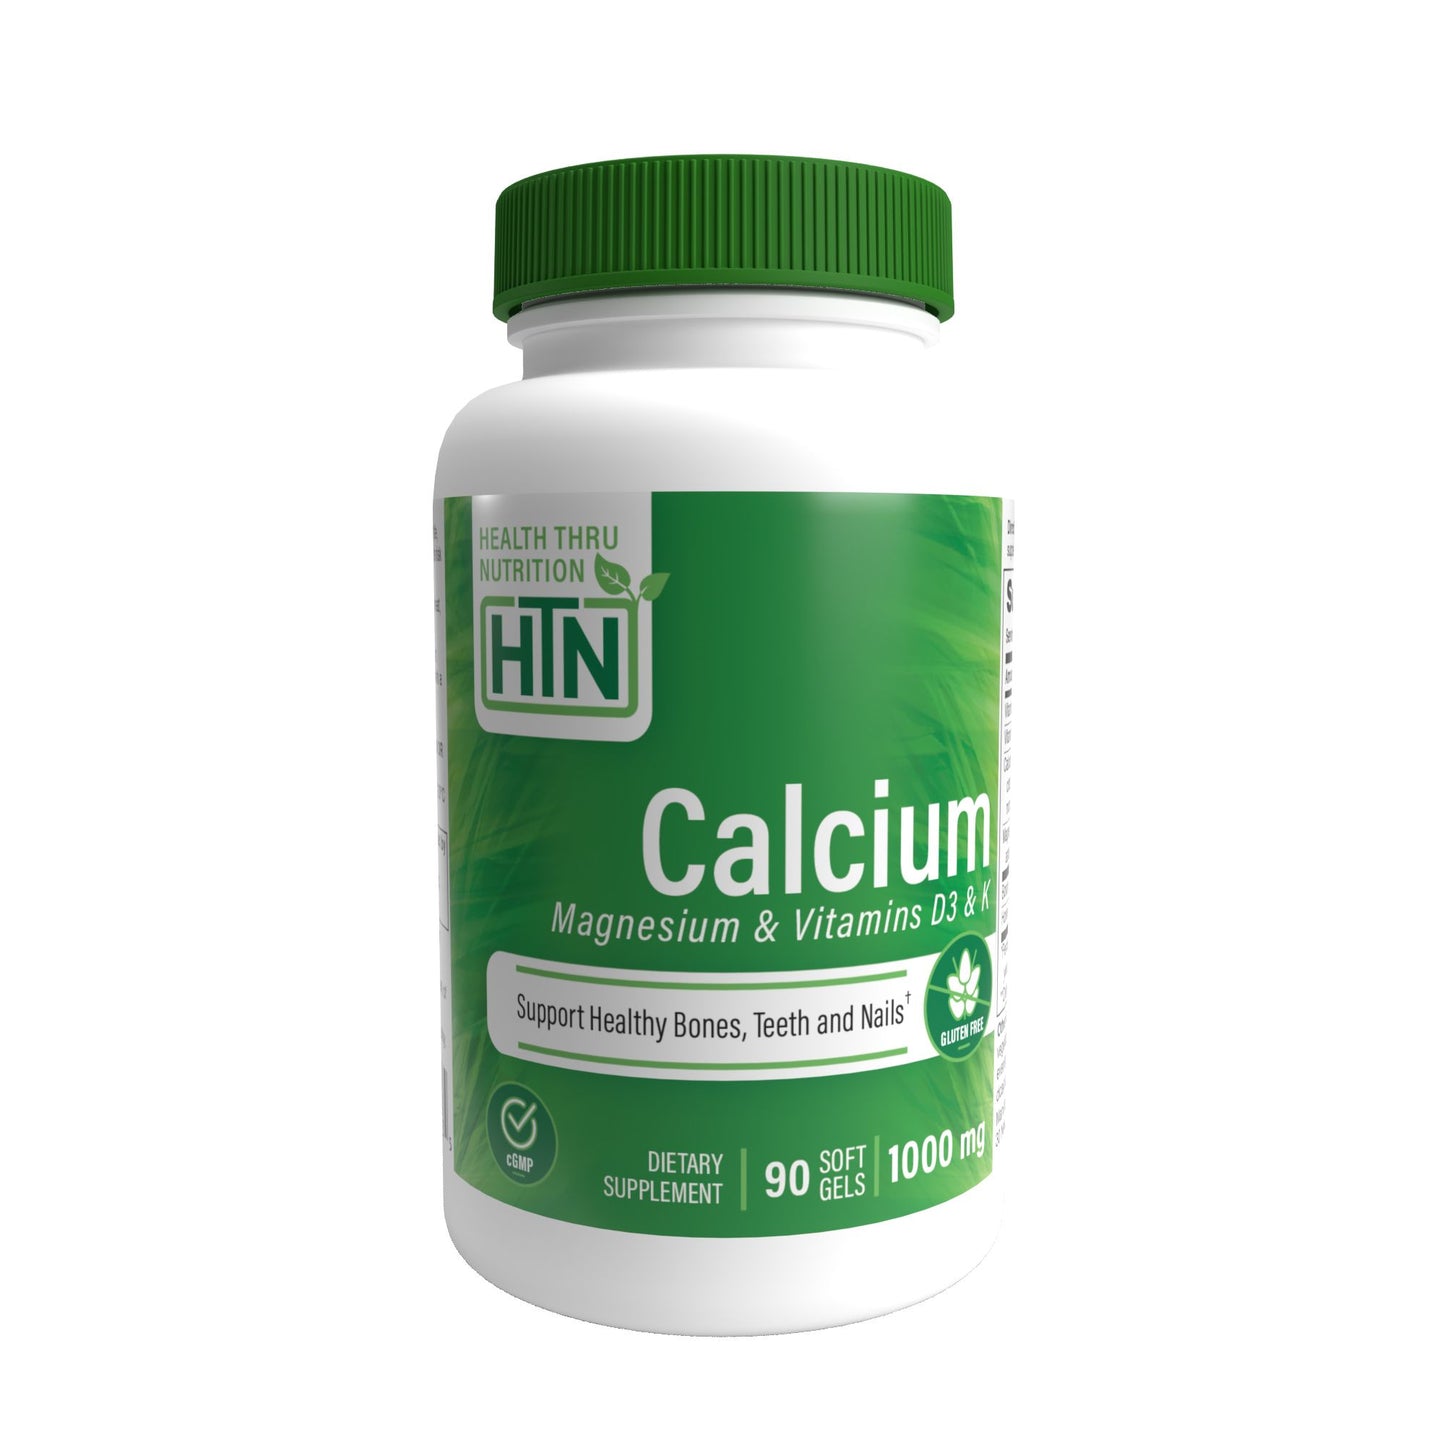 Health Thru Nutrition Calcium 1000 mg and Magnesium 400 mg with 100IU D3 & K 90 Softgels